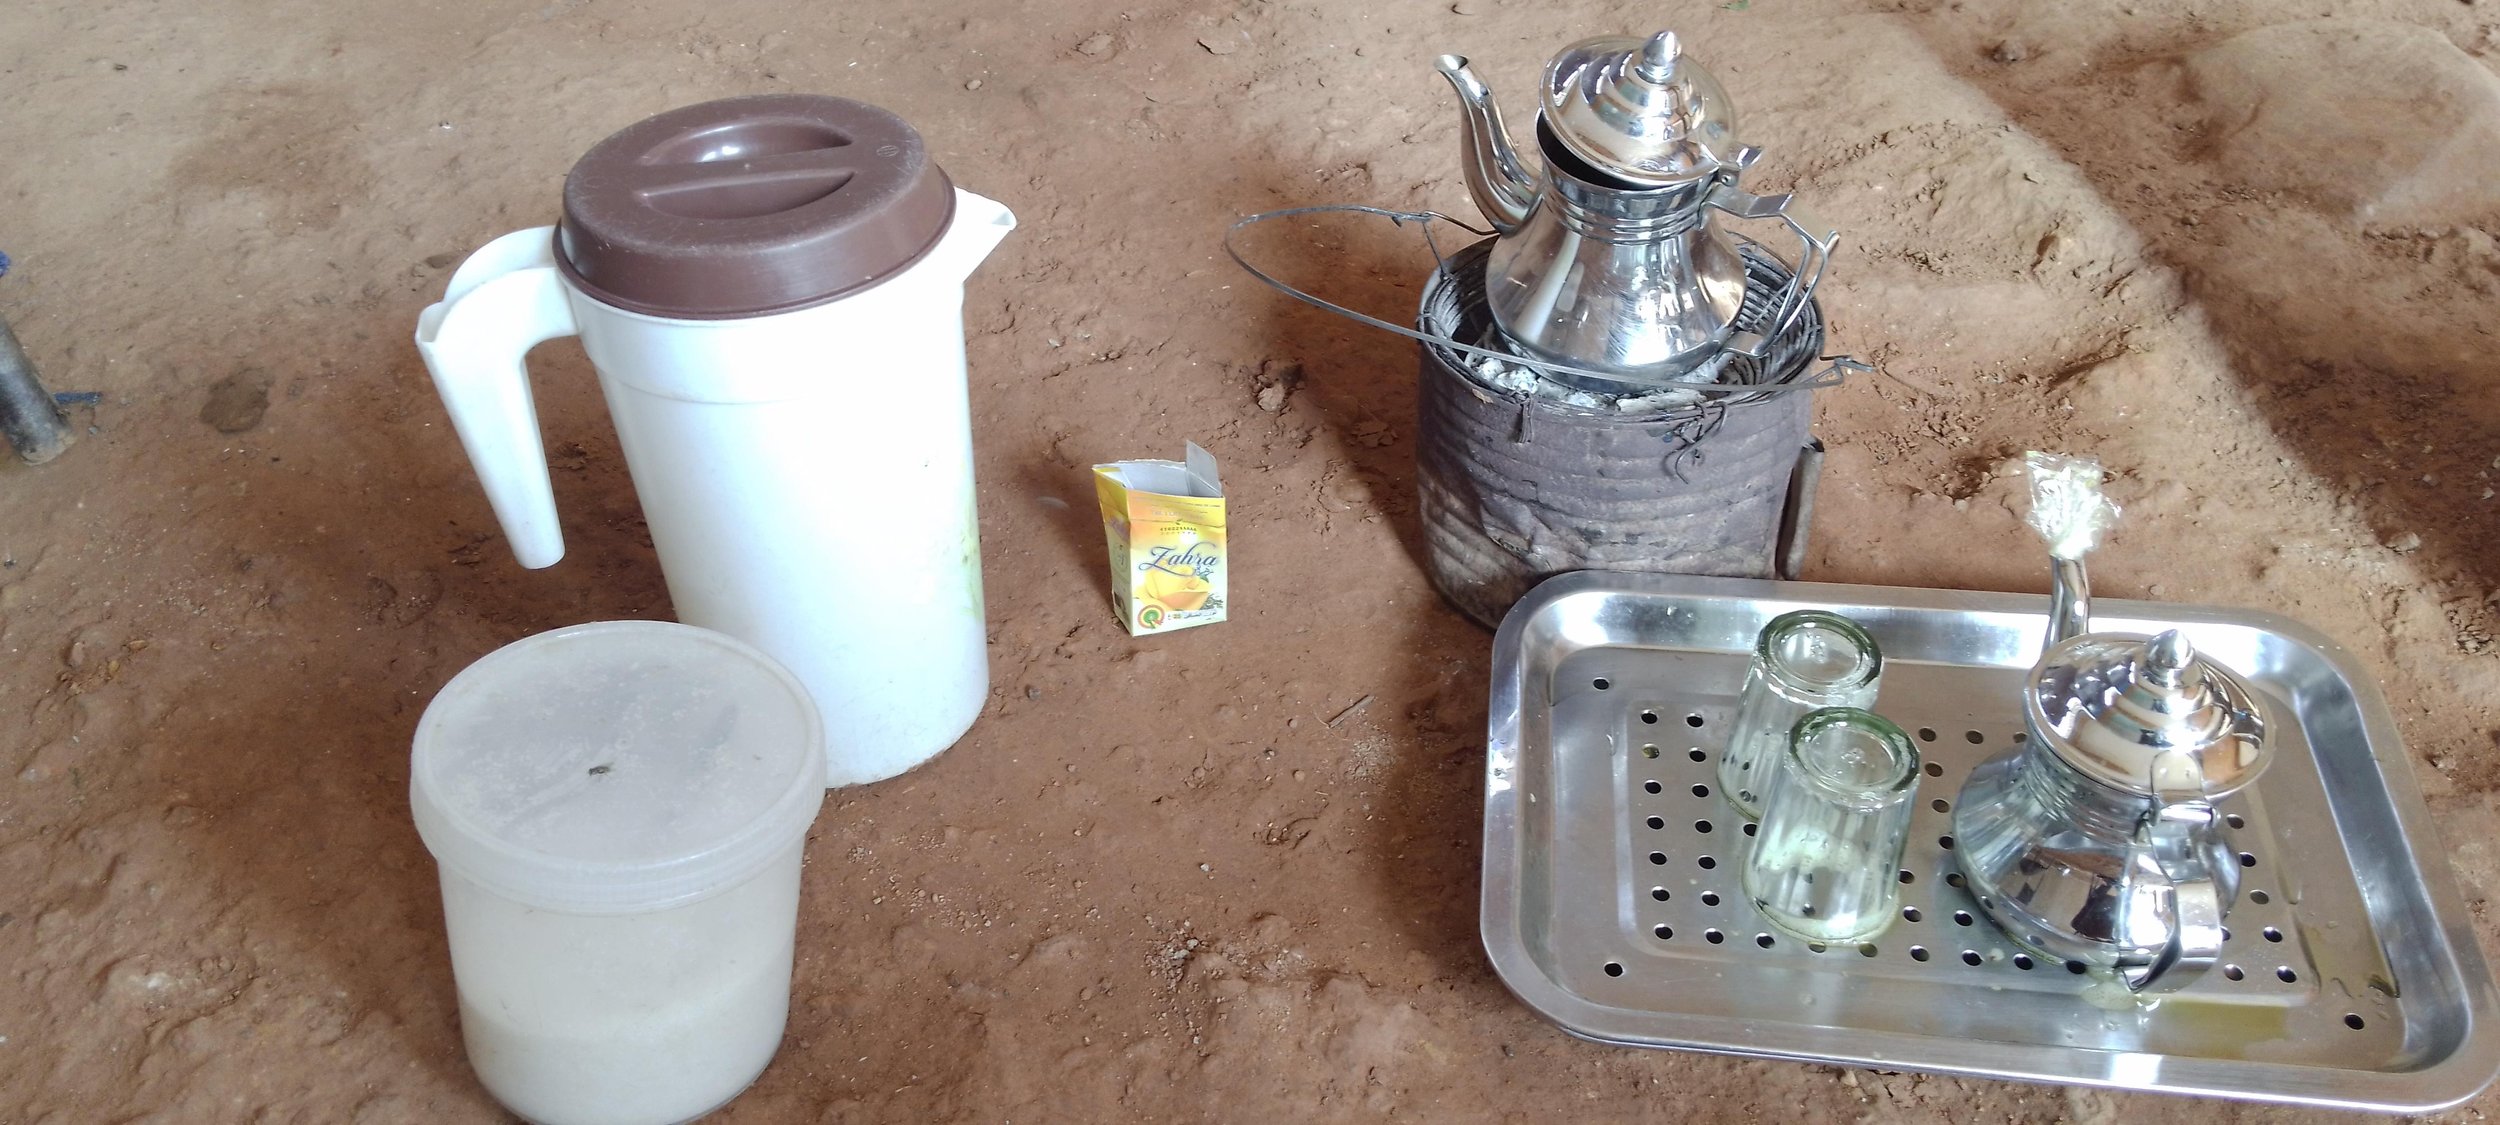 Tea makes discussions smoother in Mali.